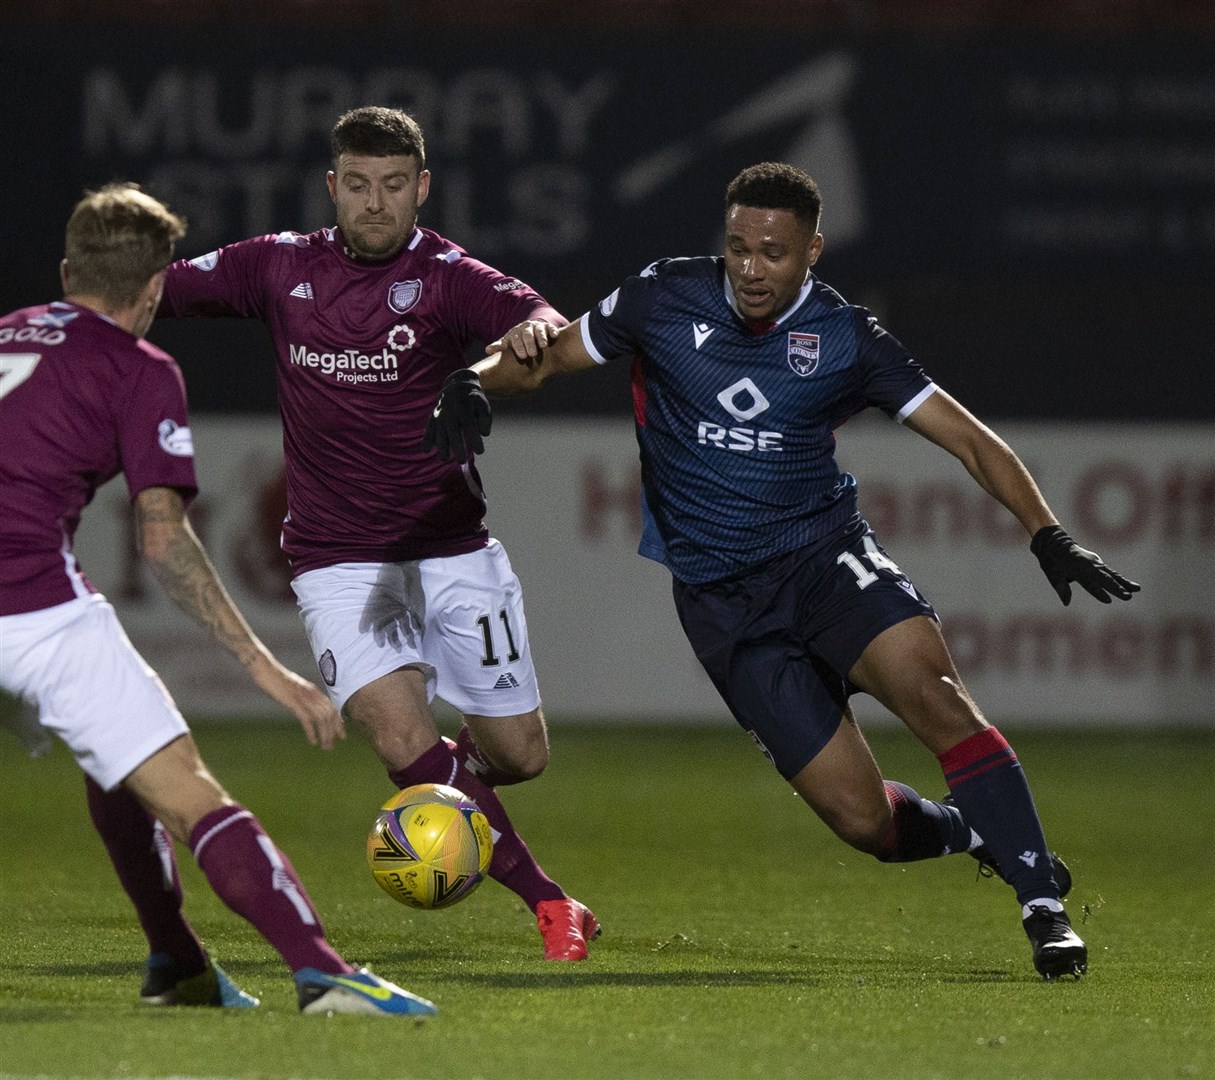 Jermaine Hylton has had an encouraging start to his Ross County career, but there may still be more to come.